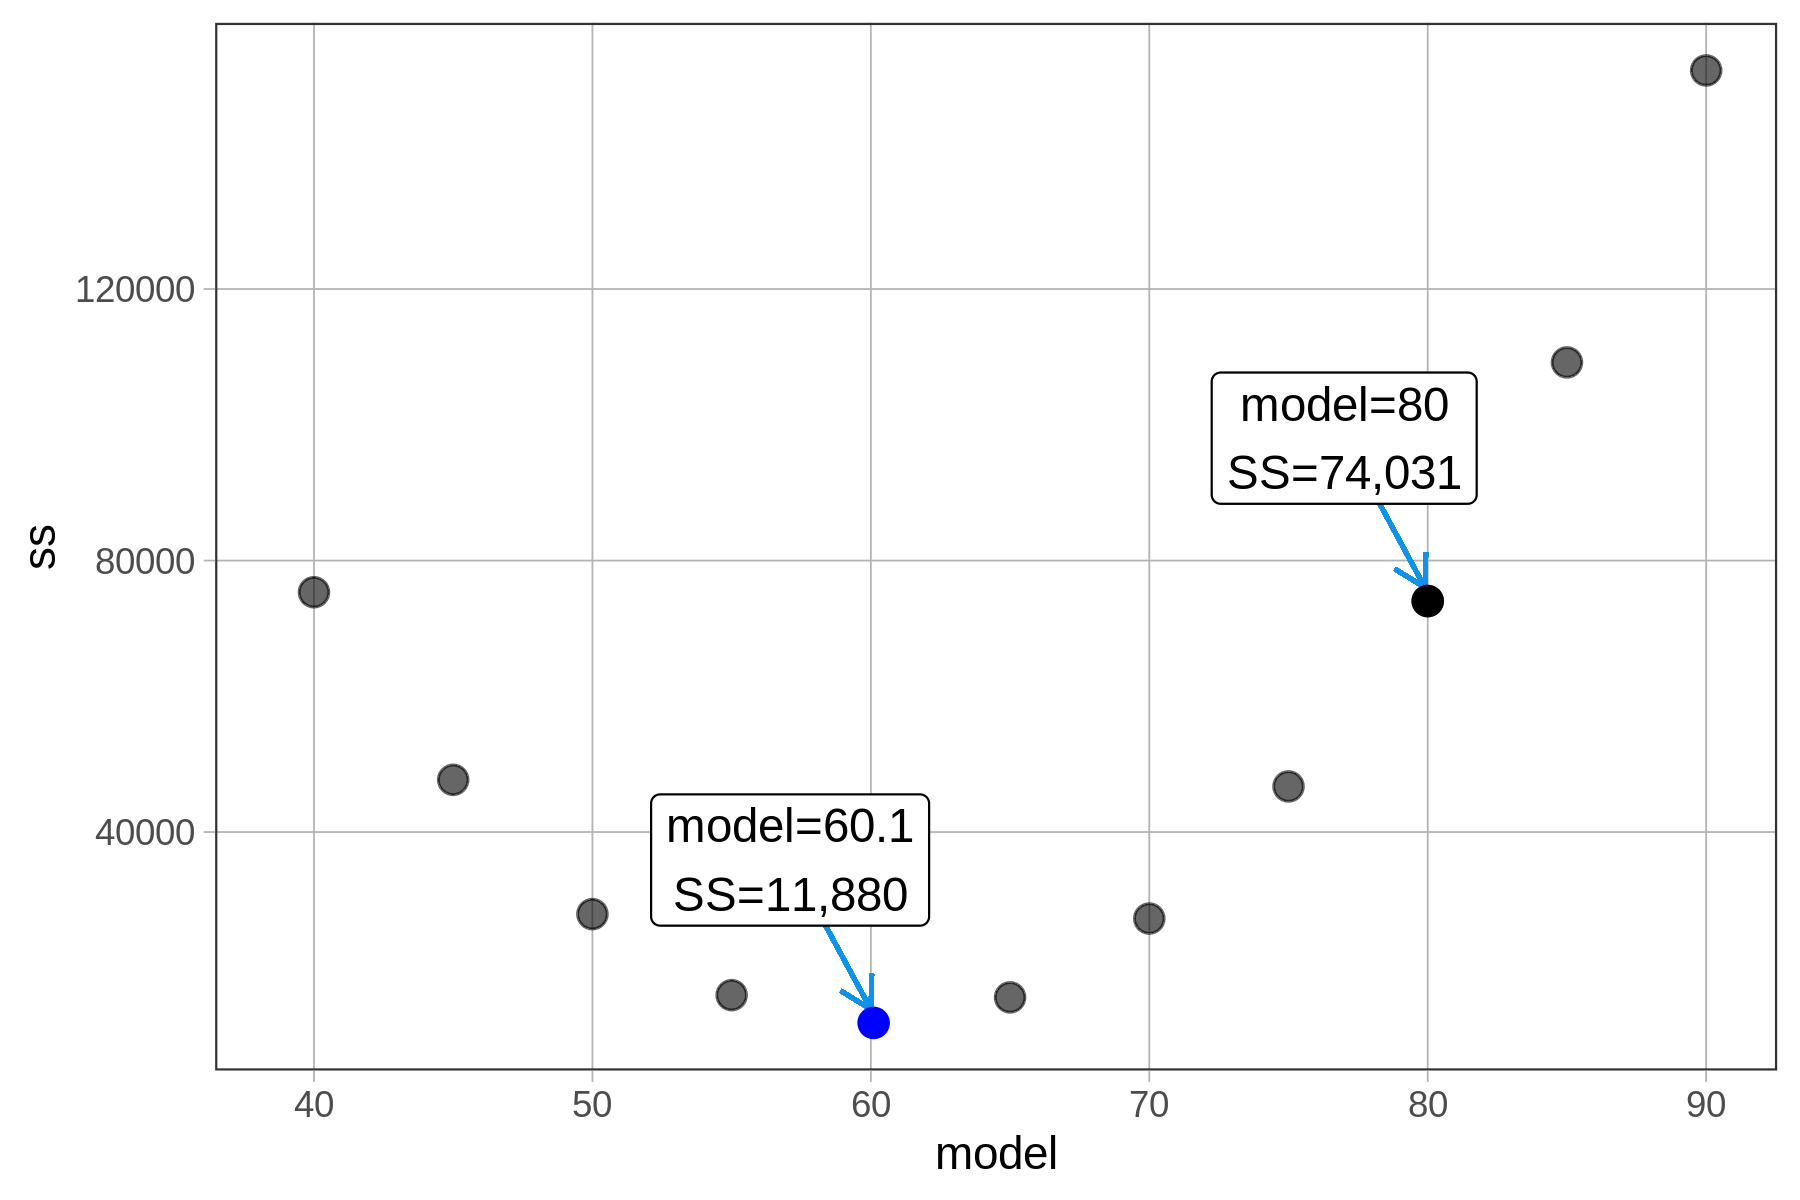 Scatterplot of SS on the y-axis and model on the x-axis. The points are distributed in a curved shape, starting near the midrange of SS and a model of 40, then dropping down to its lowest SS of 11,880 near a model of 60, and curving back up as the model goes up to 90.